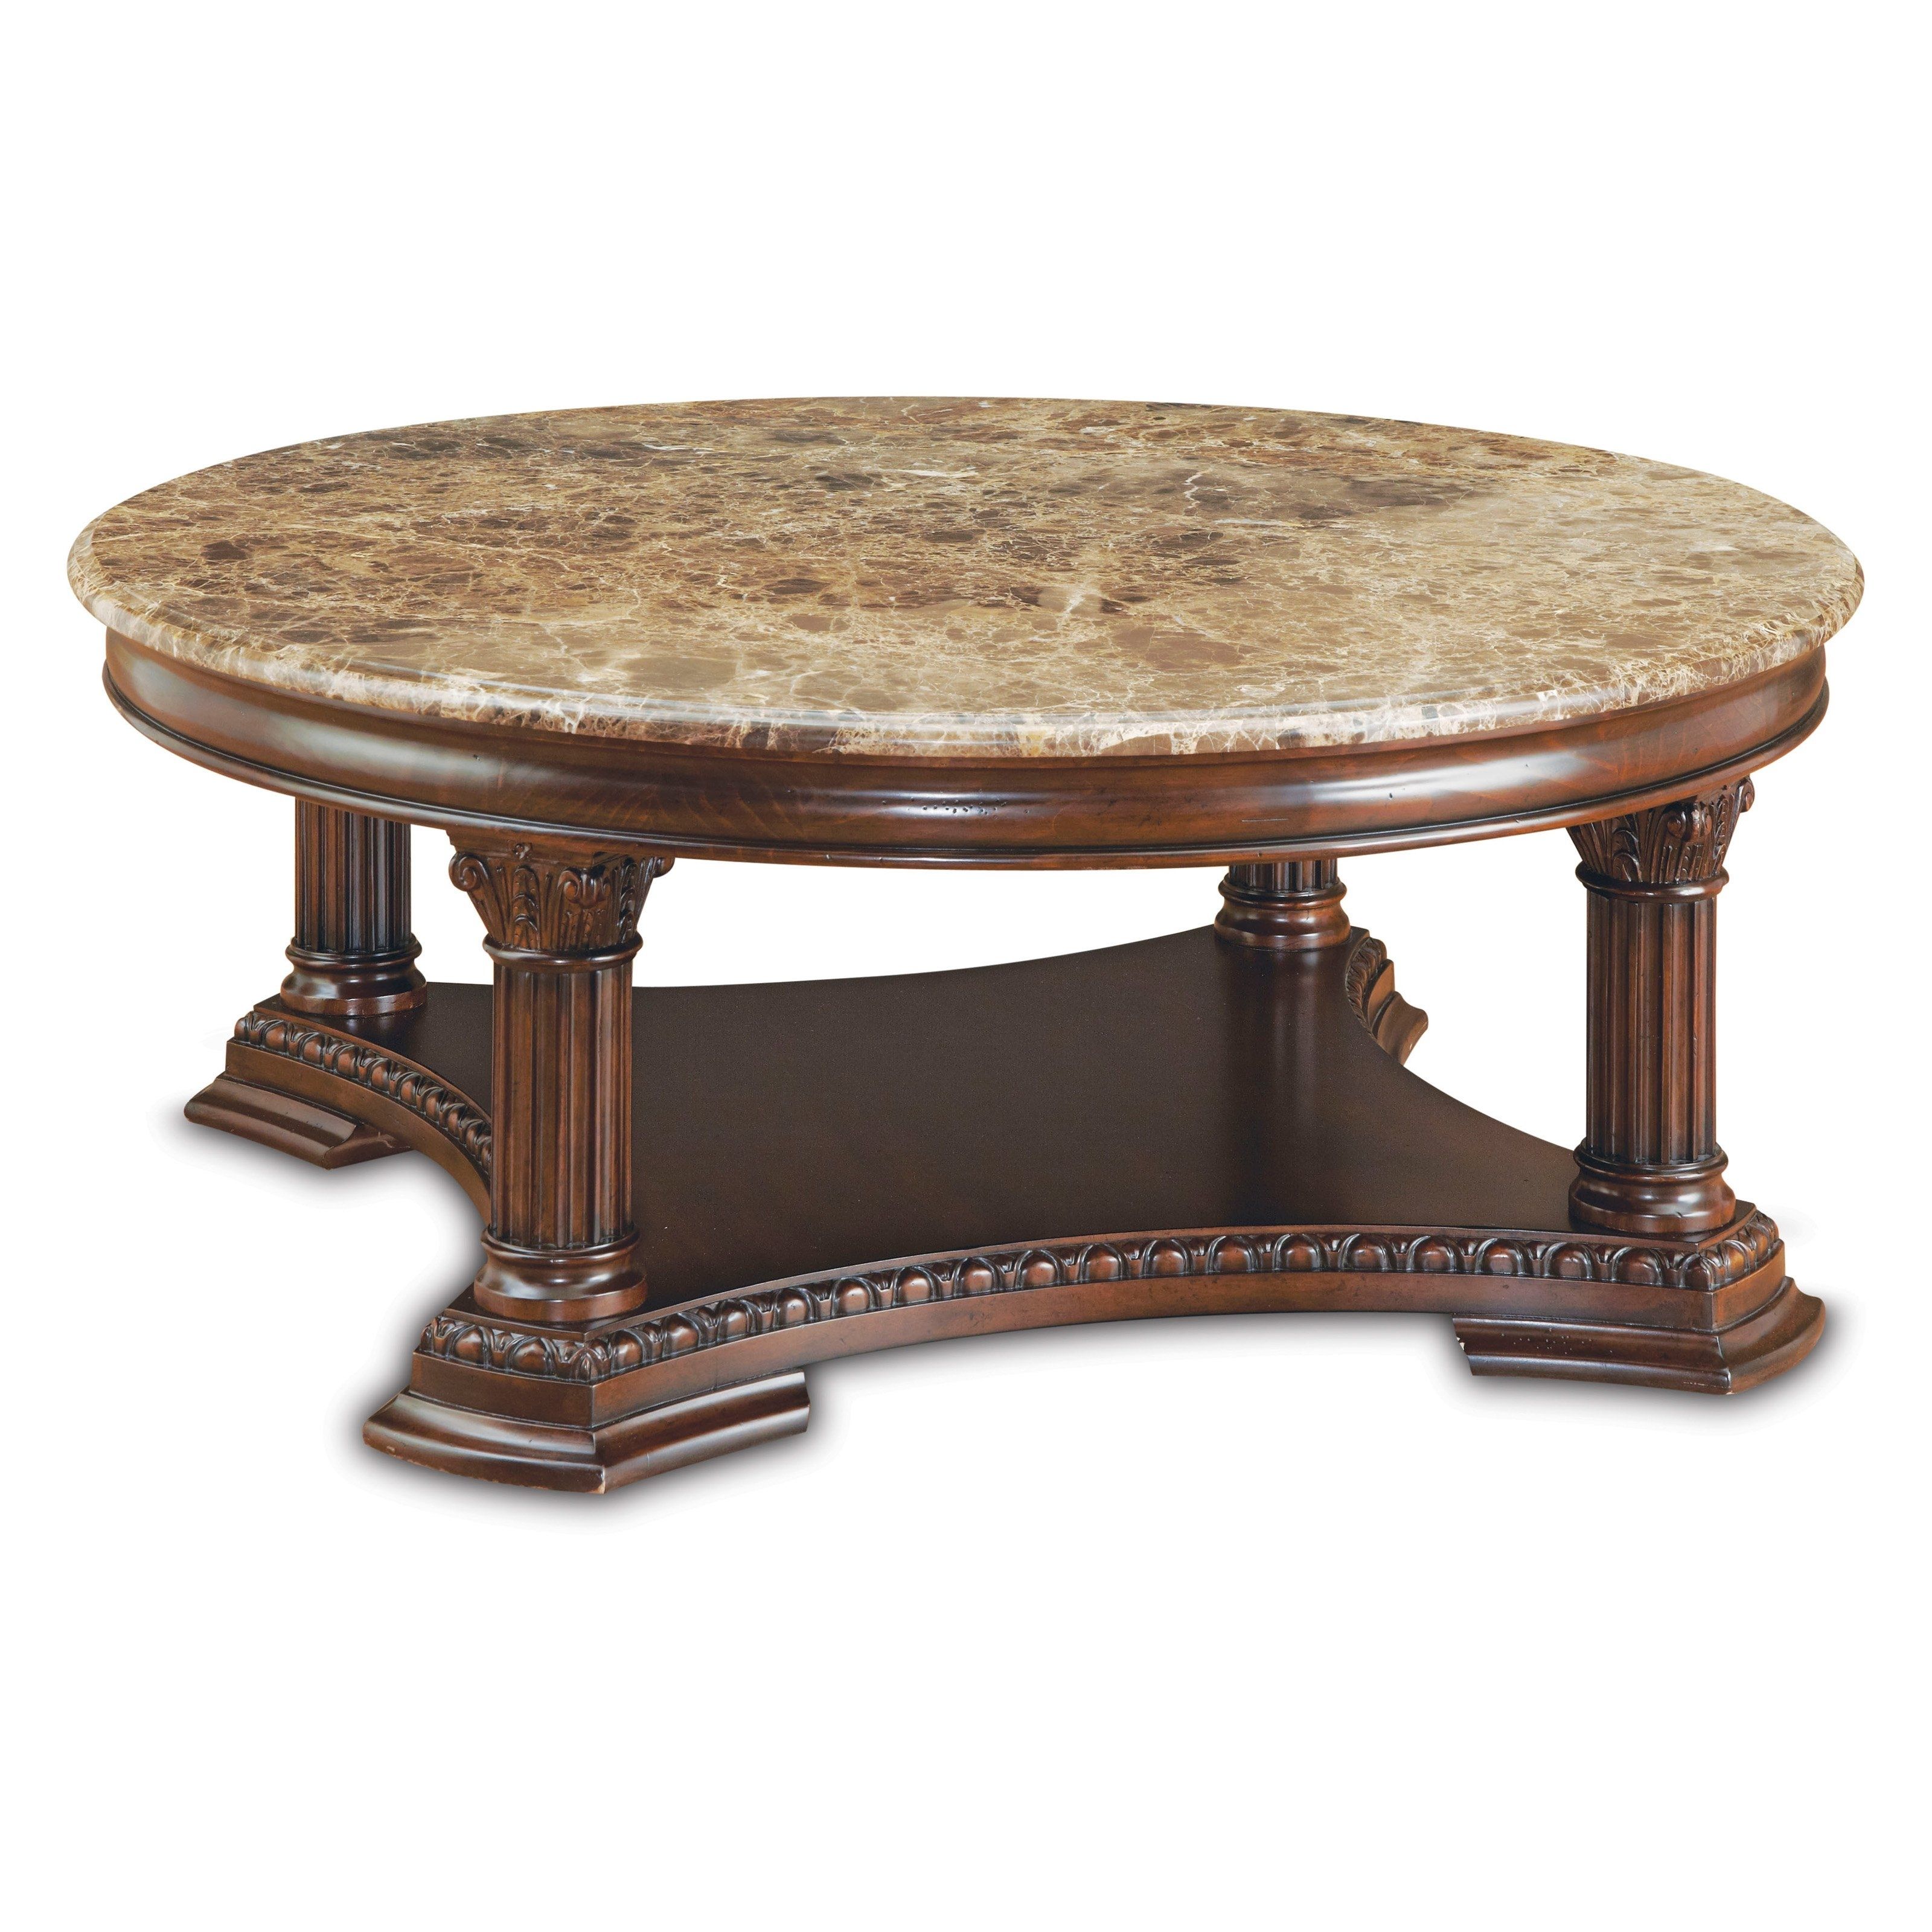 Amazing Of Round Marble Top Coffee Table With Coffee Table Cool Of Throughout Stone Top Coffee Tables (View 23 of 30)